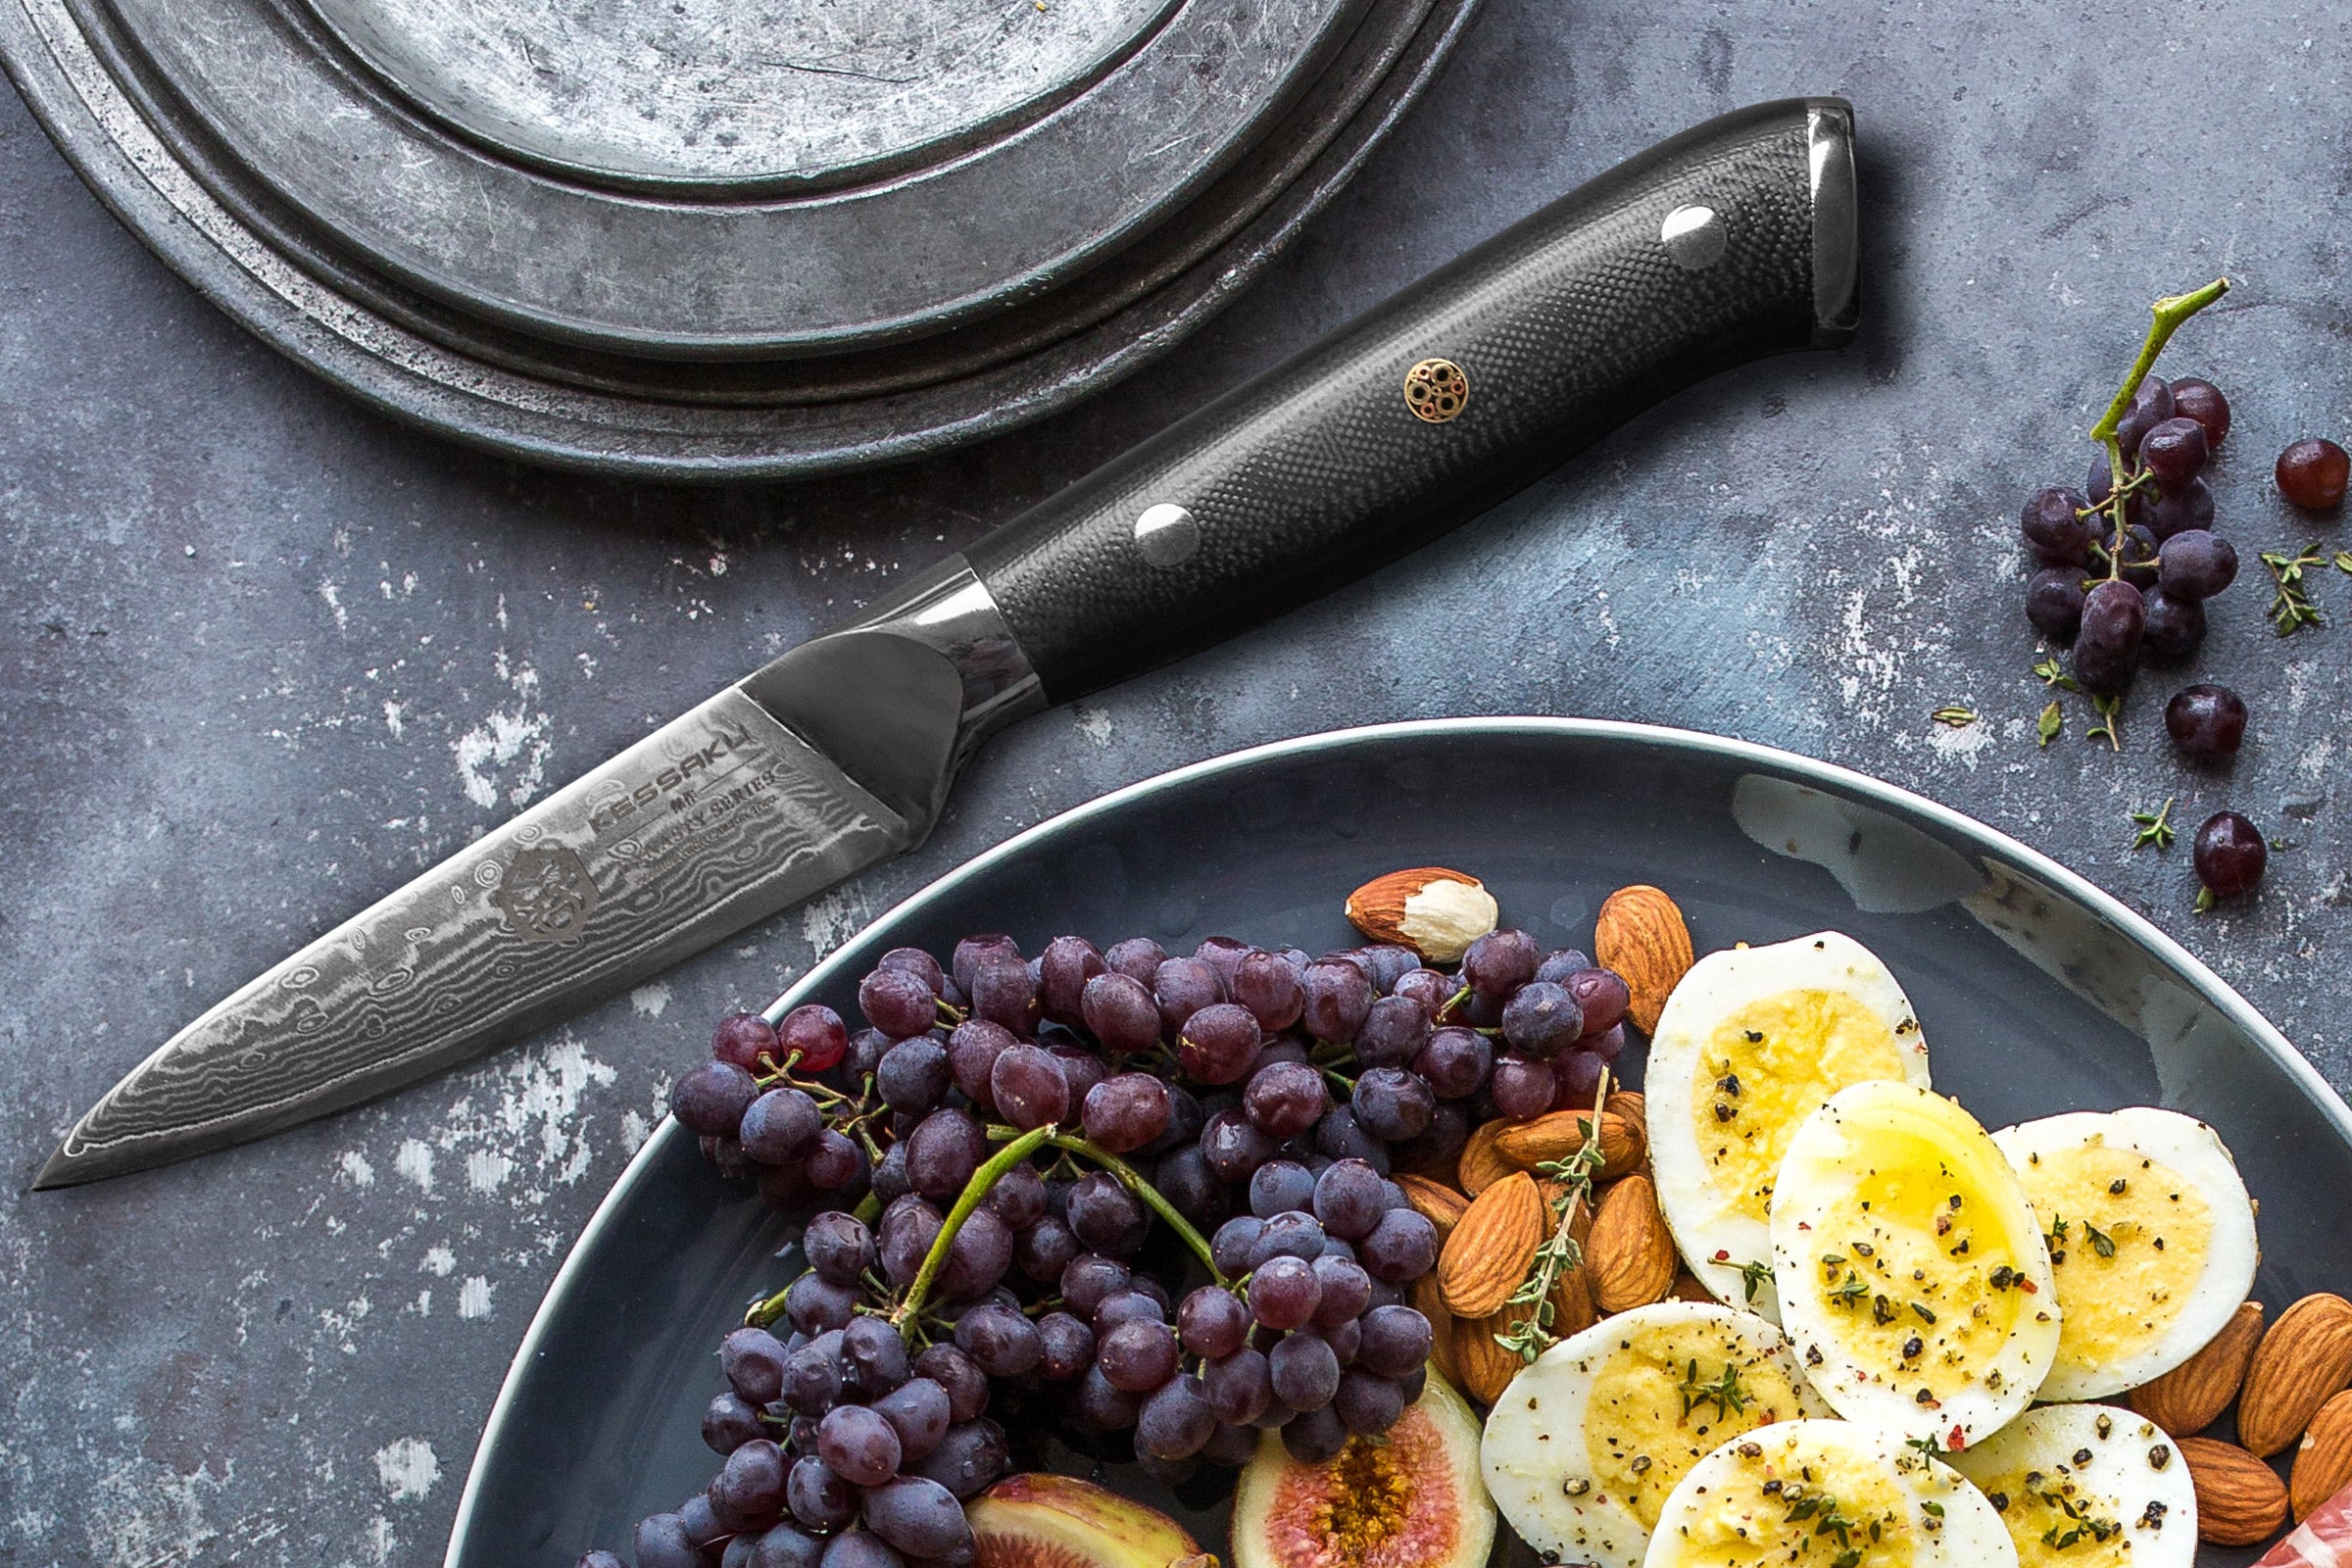 The Dynasty Damascus Paring Knife with a plate of sliced hard boiled eggs, figs, red grapes, and almonds.